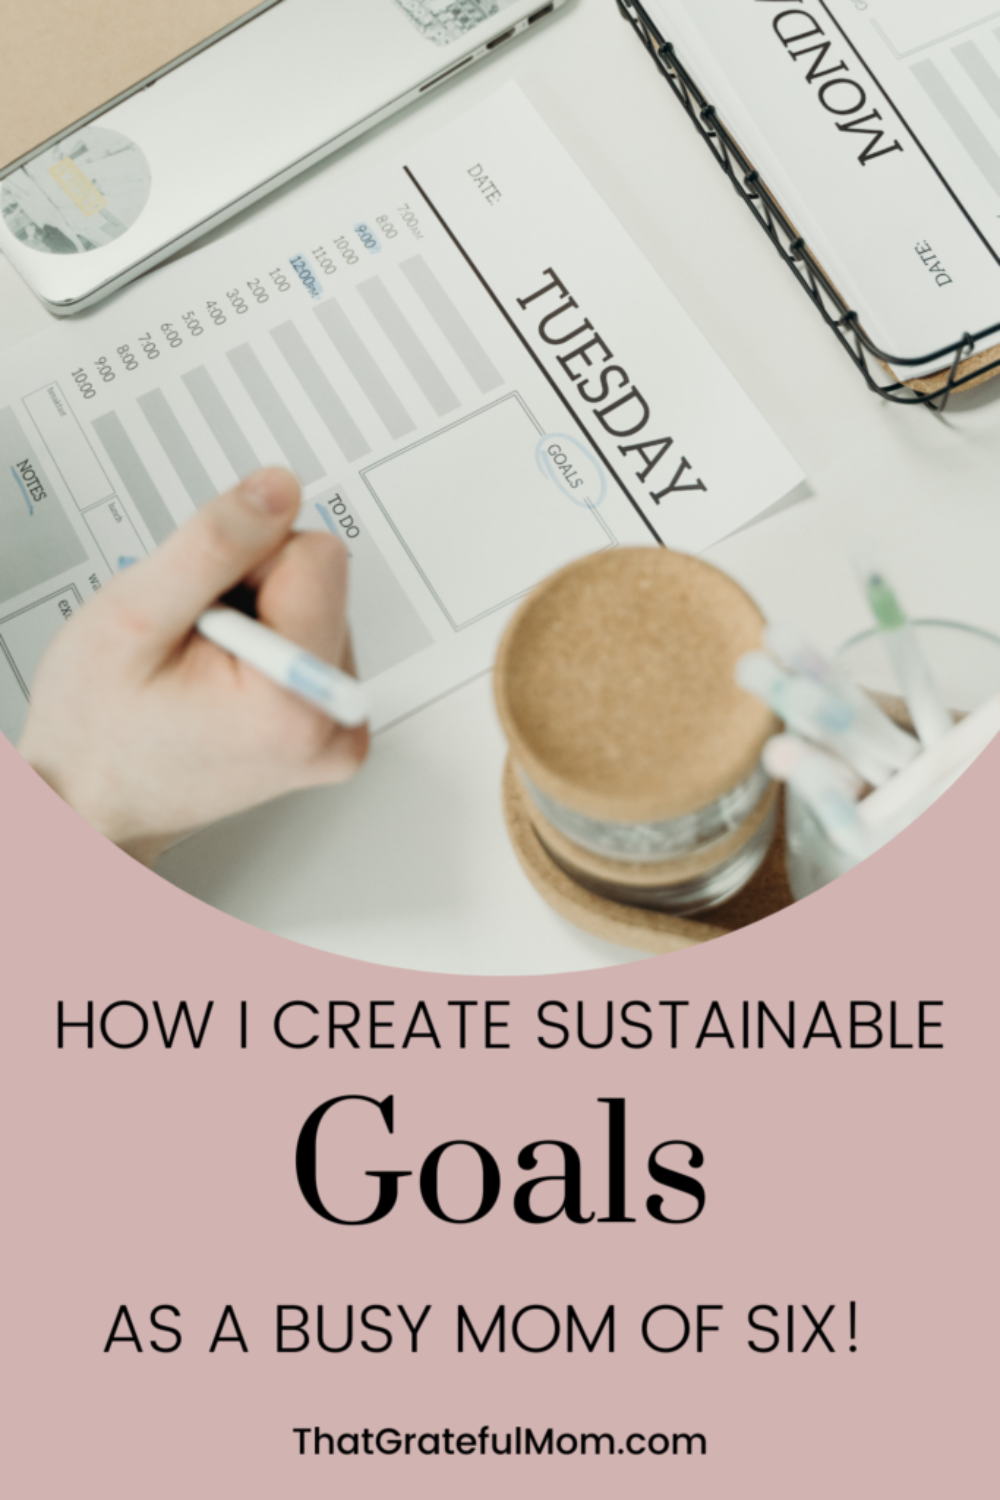 Creating sustainable goals is simple with shifts in your daily habits